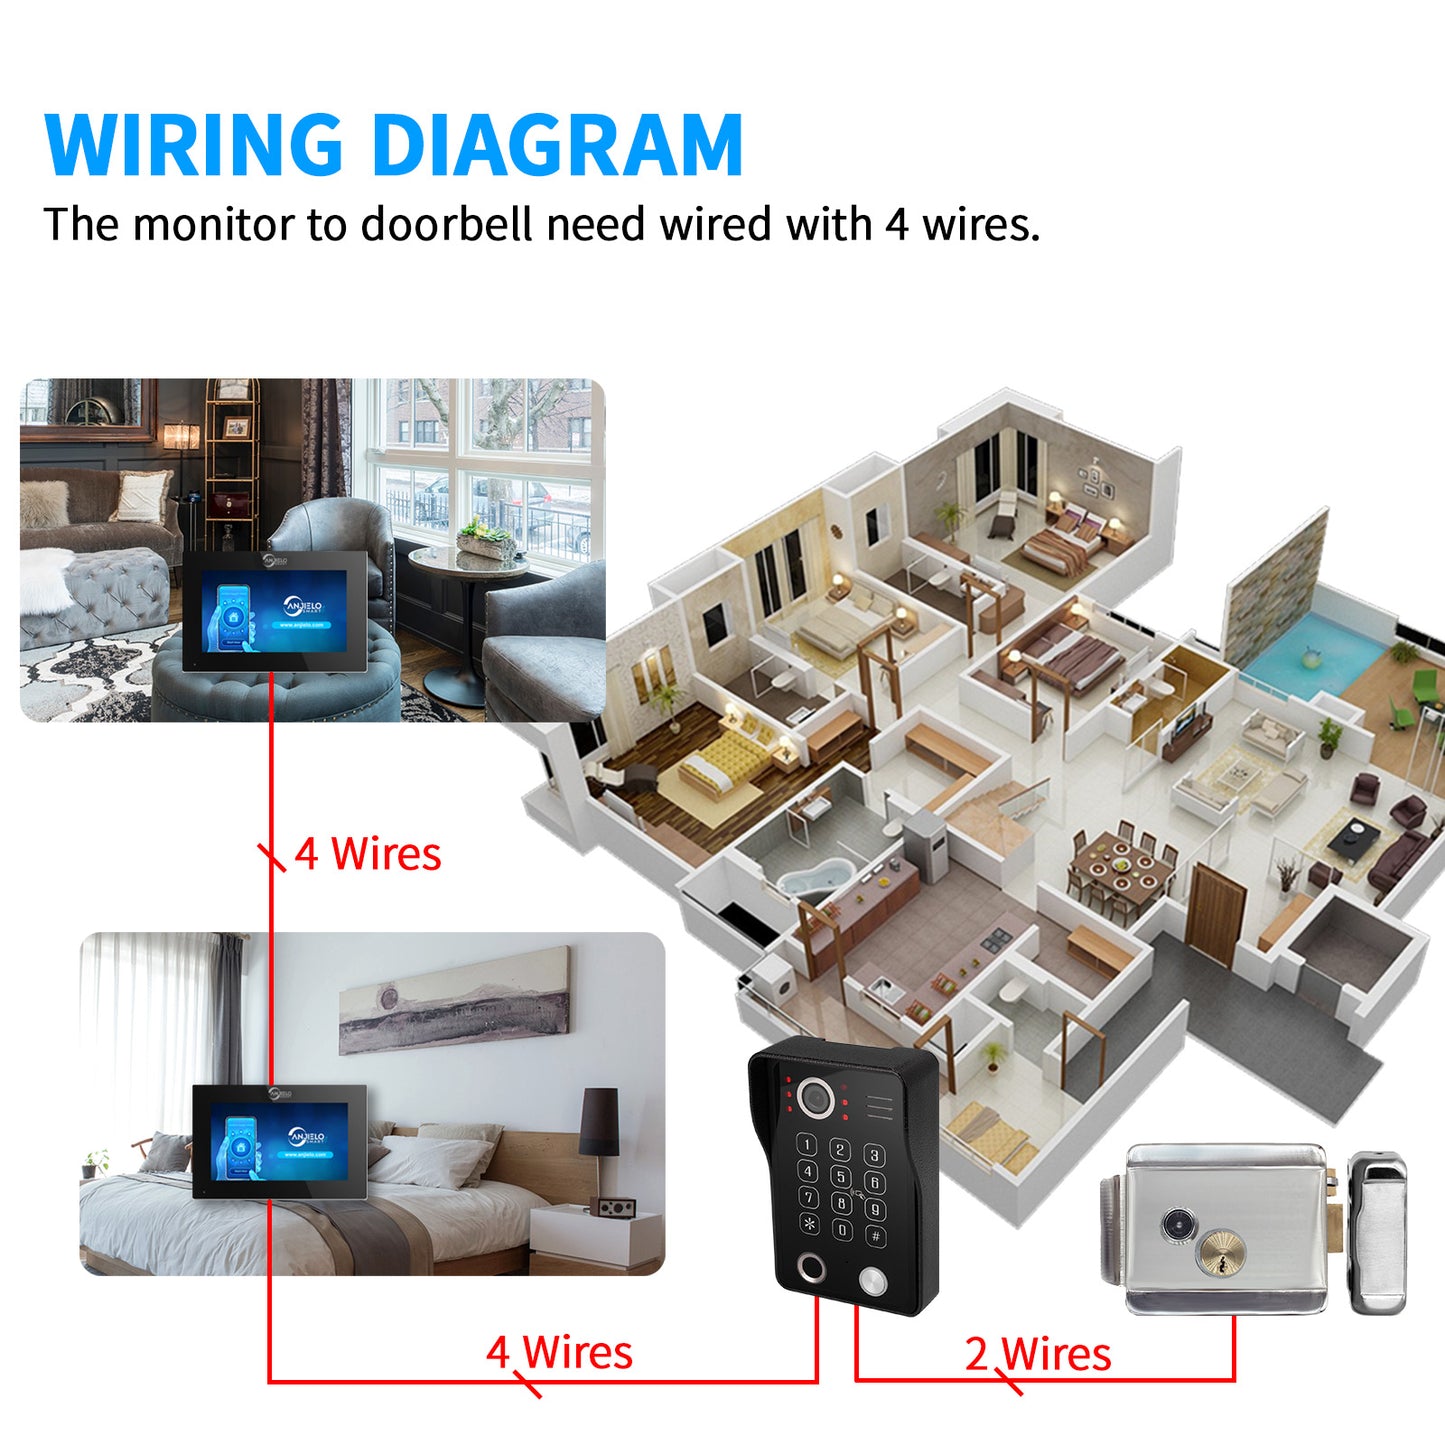 1080P Tuya Smart WiF Video Door phone Doorbell Camera with RFID Card unlcok Fingerprint and Passcode unlock for the Apartment Intercom System for Home Villa